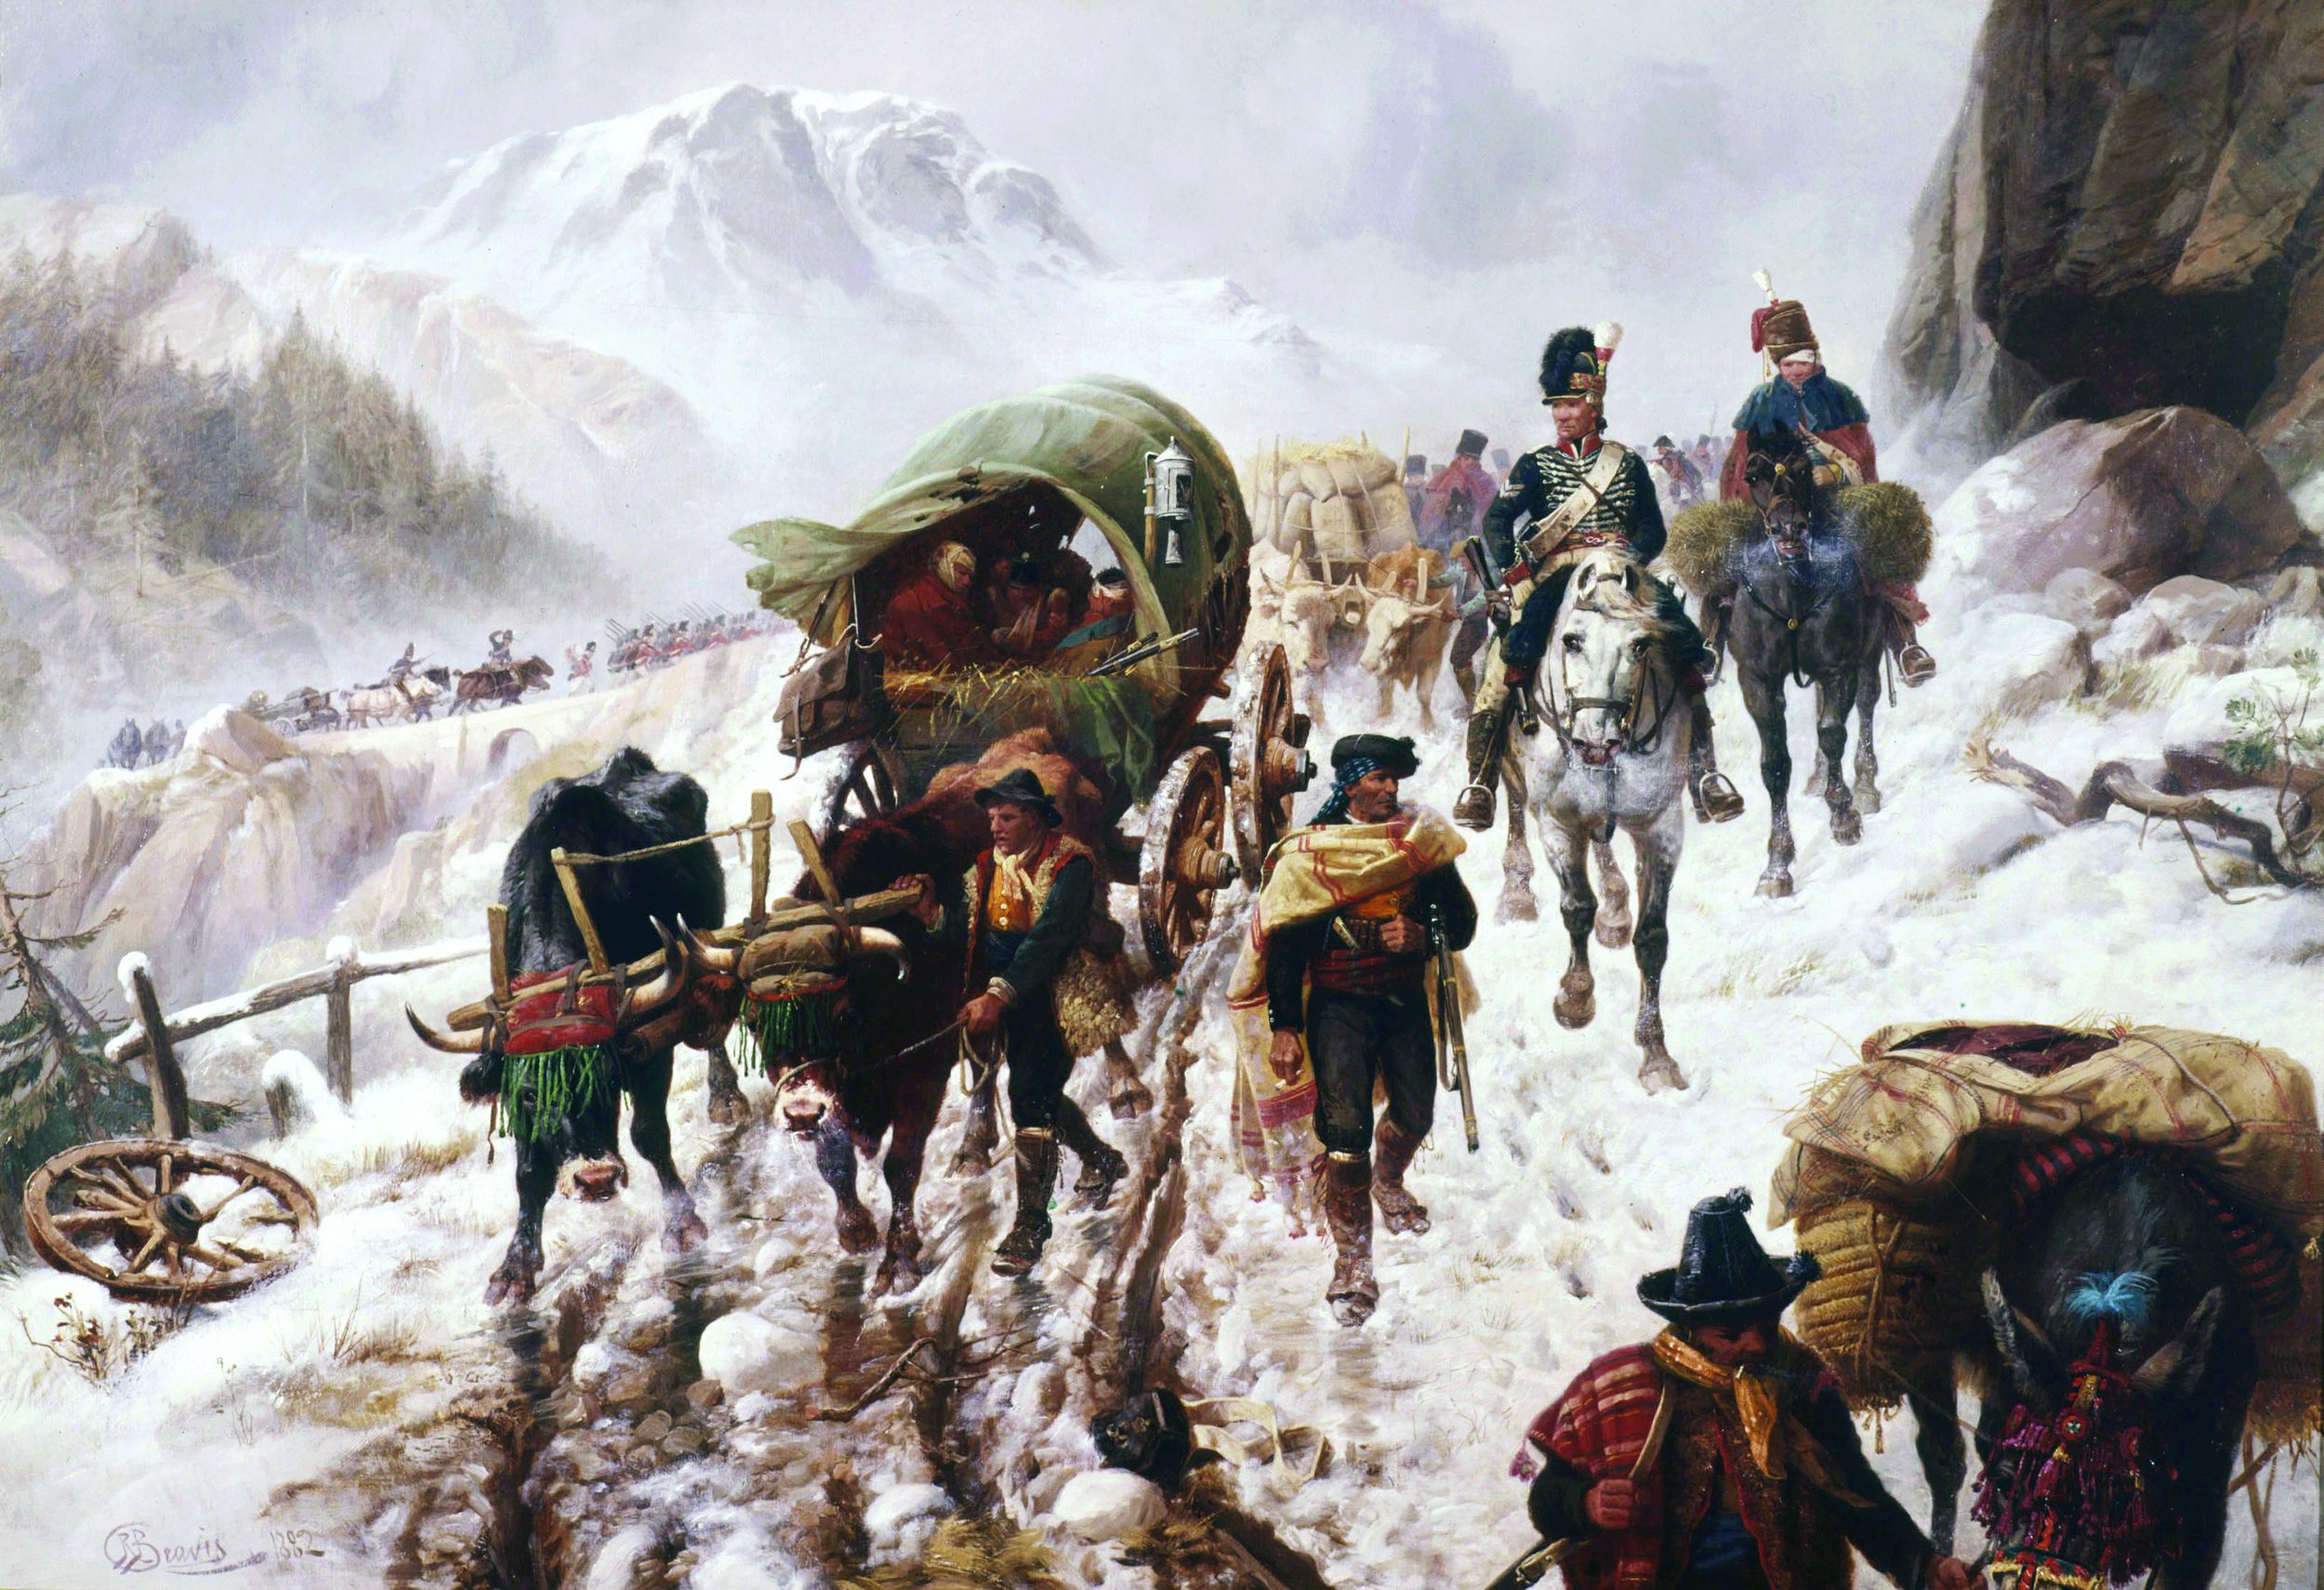 Wracked by wintry weather, demoralized British soldiers trudge the snow in artist Richard Bevis’s painting, Retreat to Corunna.